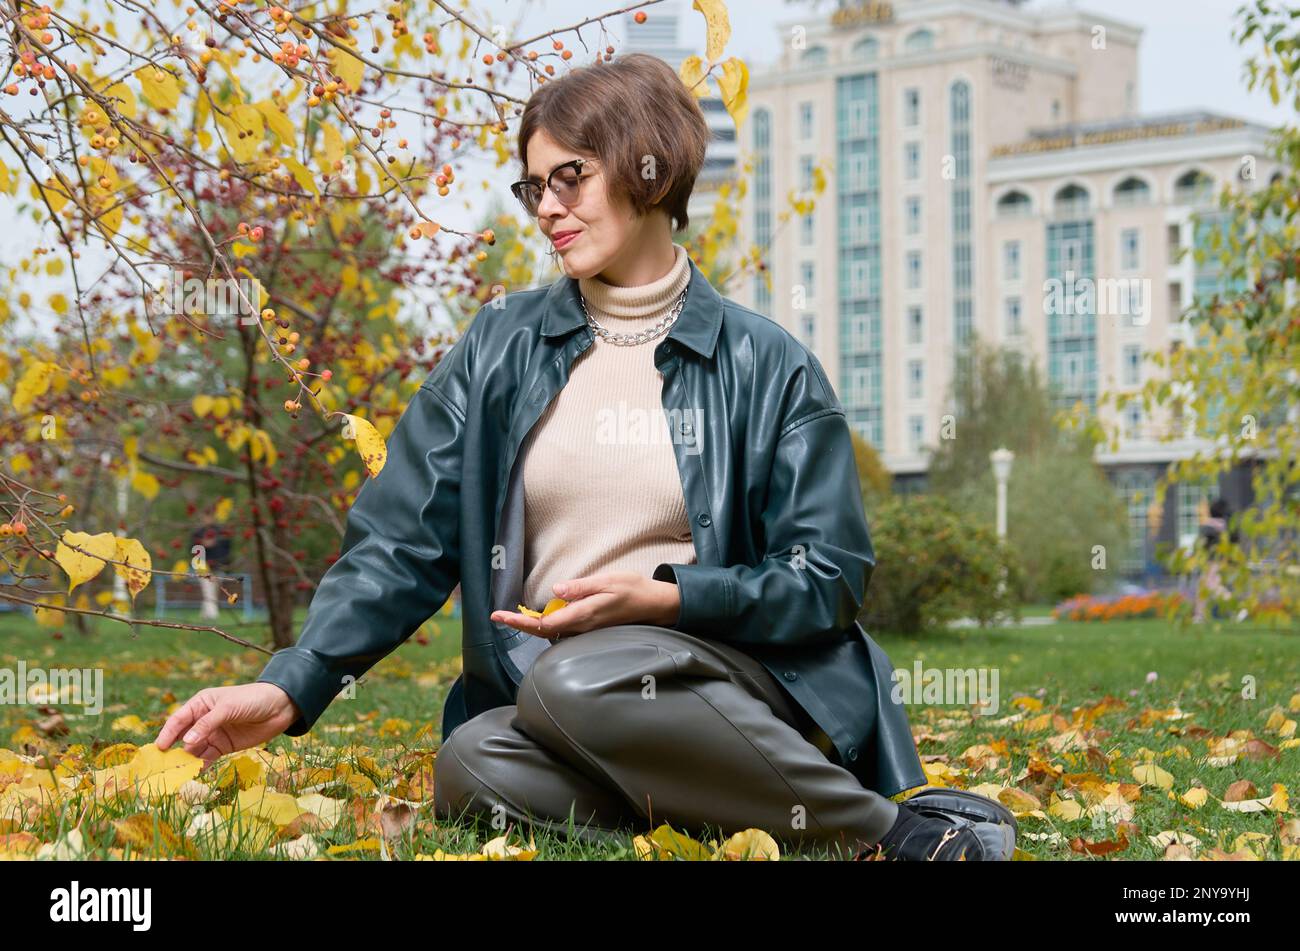 A woman in leather clothes sits on the ground among yellow leaves in an autumn park Stock Photo